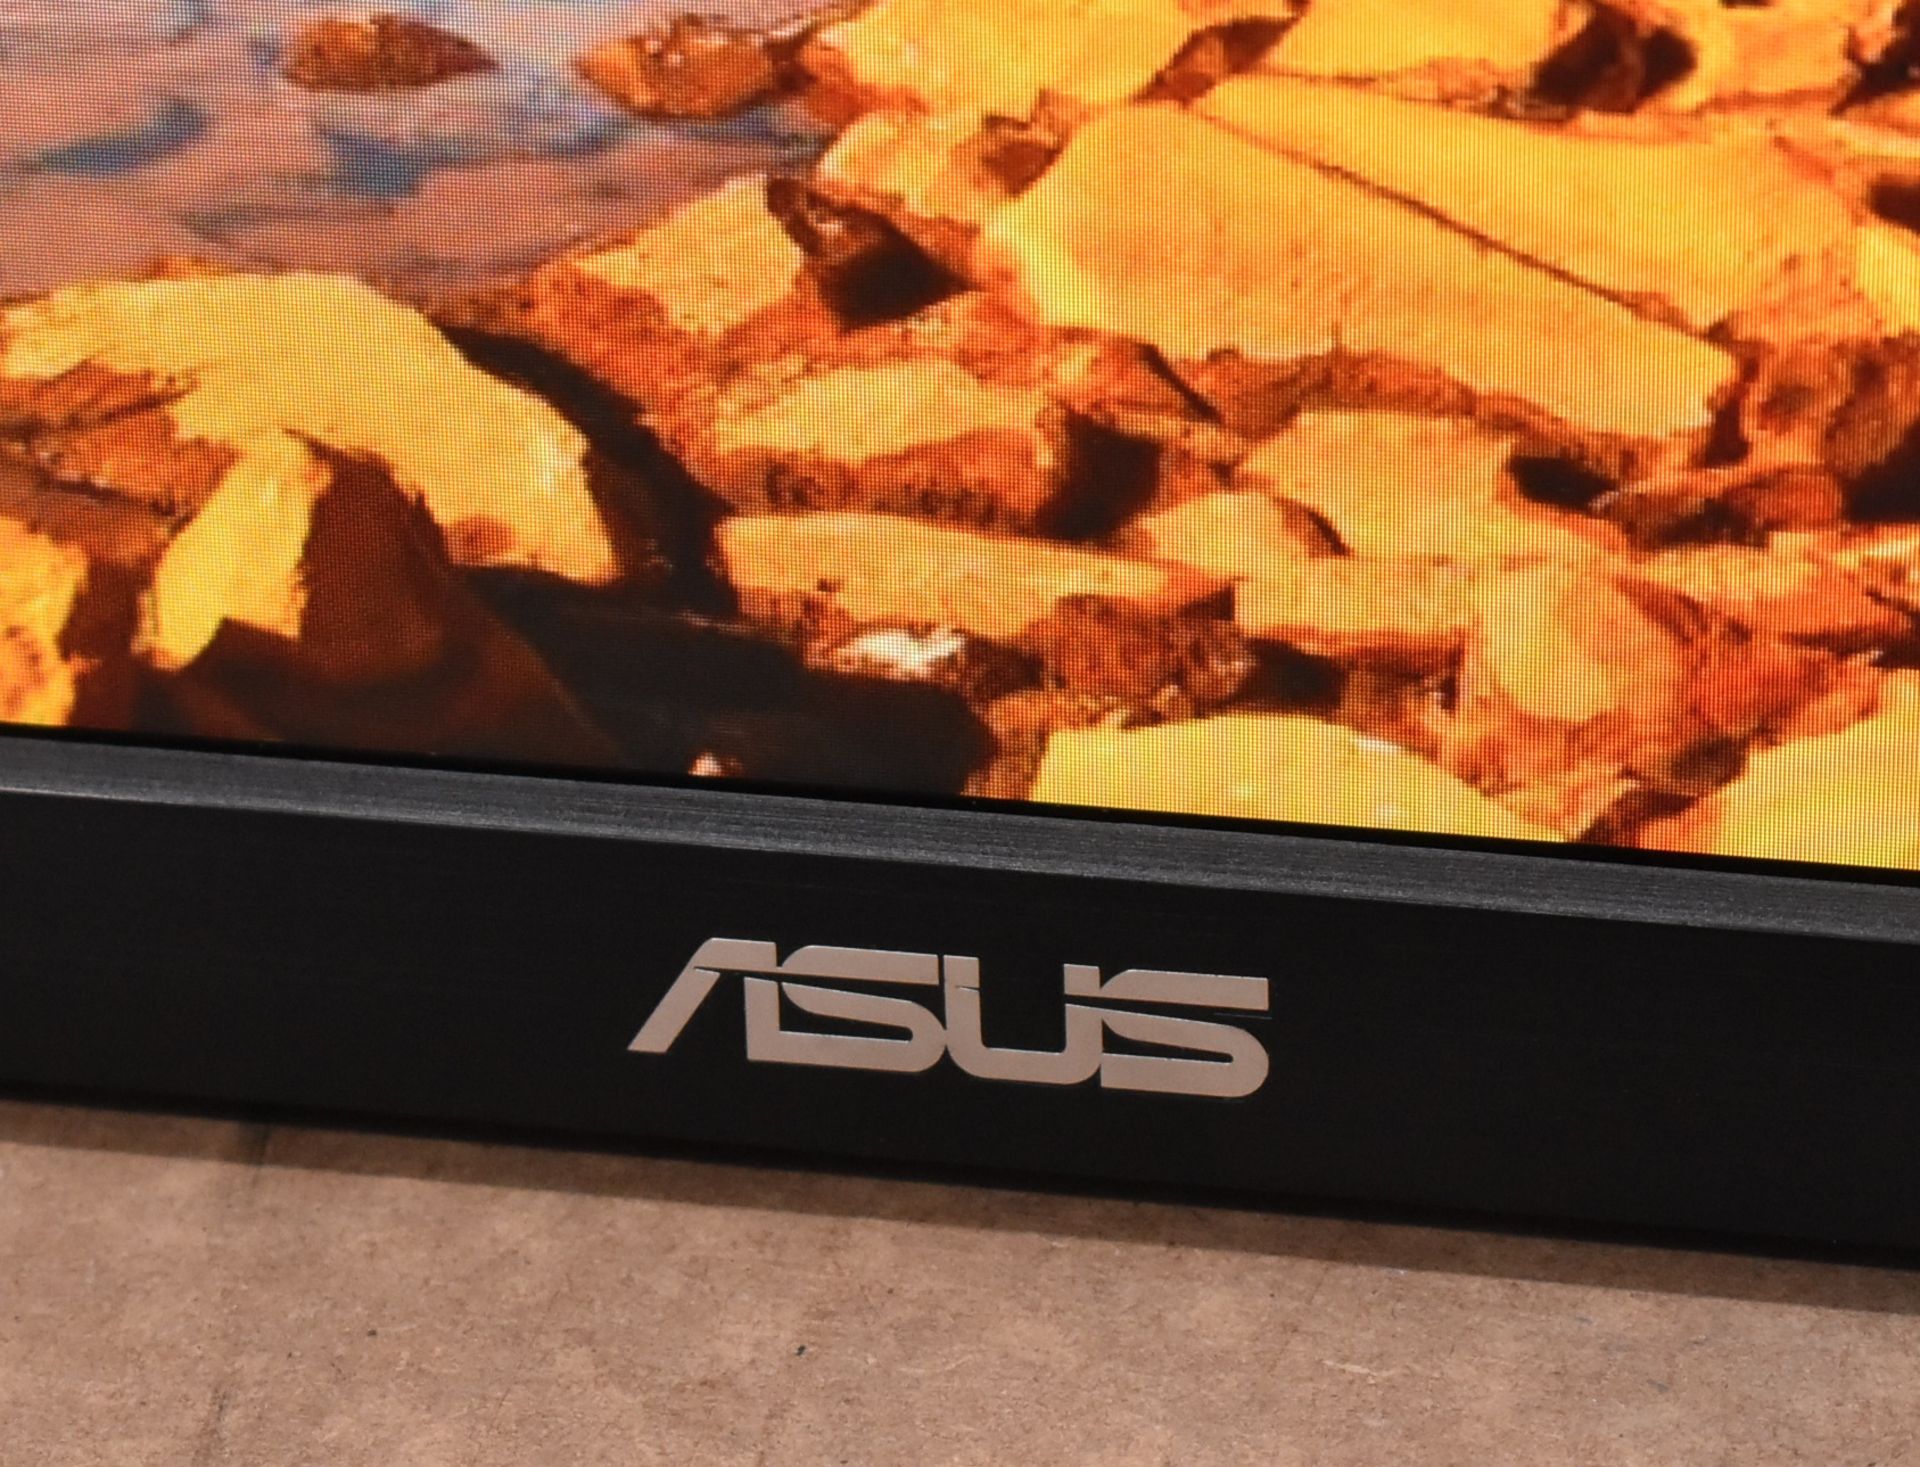 1 x Asus 23 Inch FHD Monitor - 1920 x 1080 Resolution - Model VC239 - Ref: MPC215 CA - CL678 - - Image 5 of 7